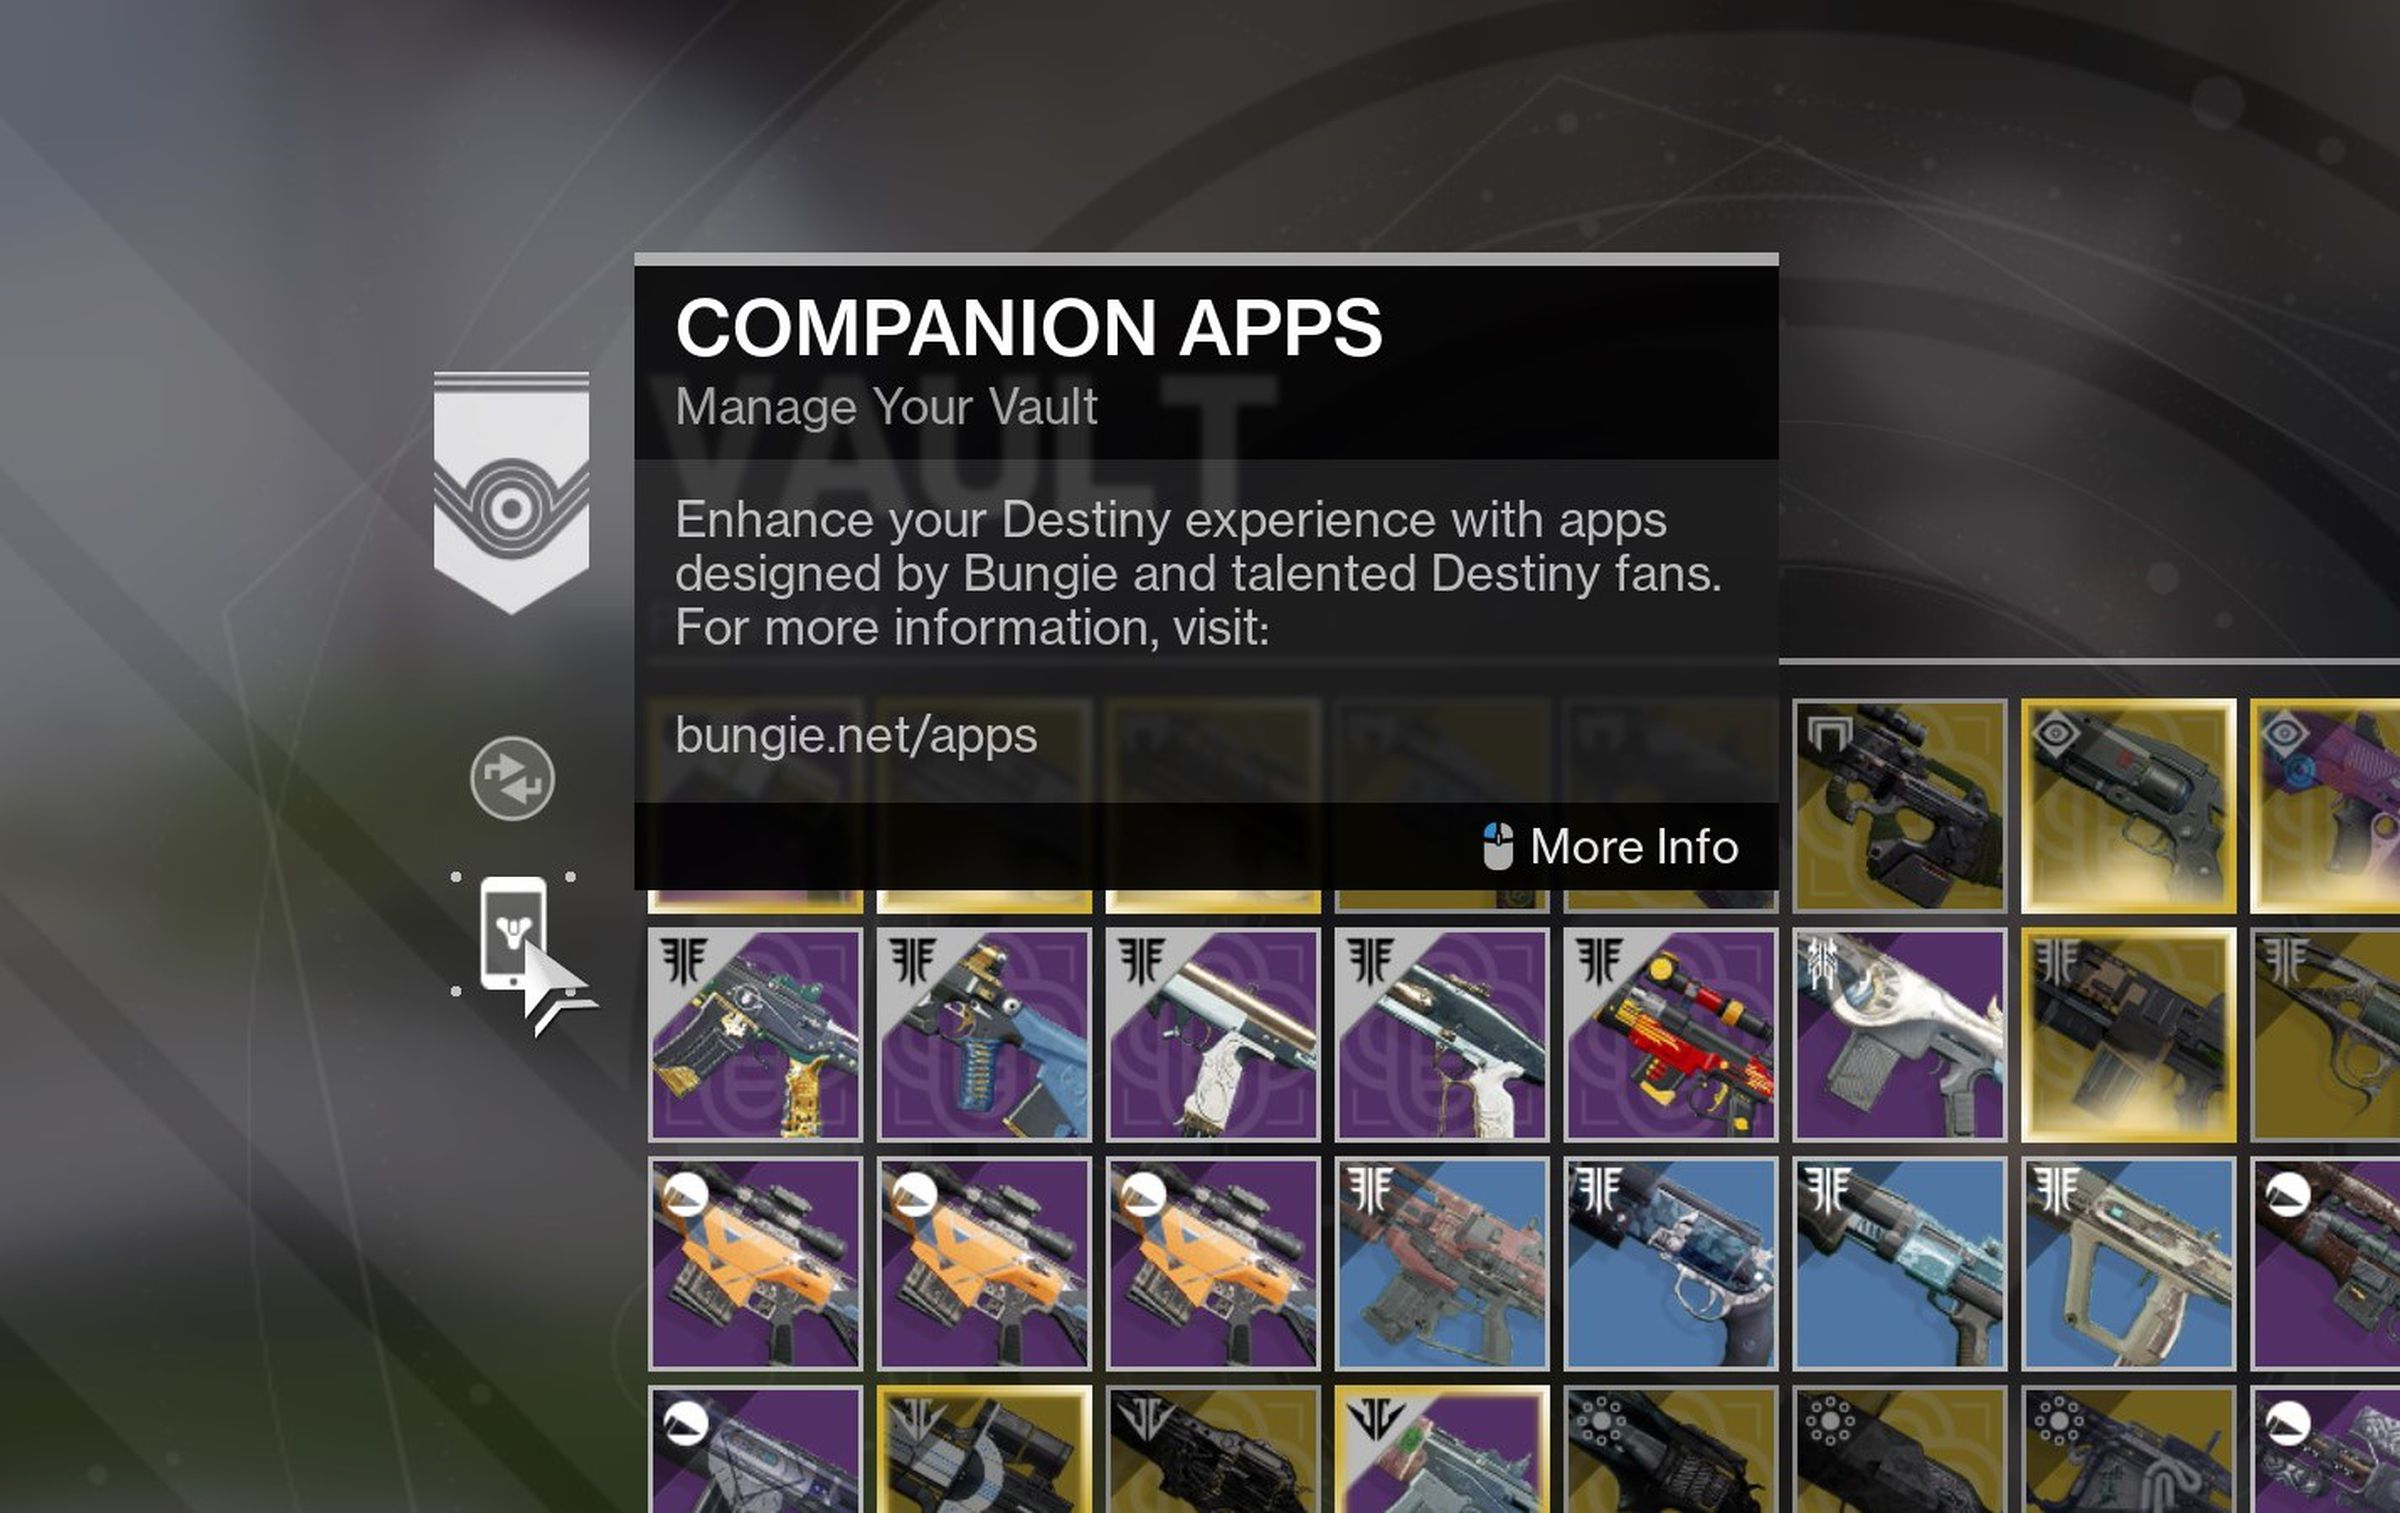 Bungie knows when it’s beat, recommending third-party apps for things like inventory management.